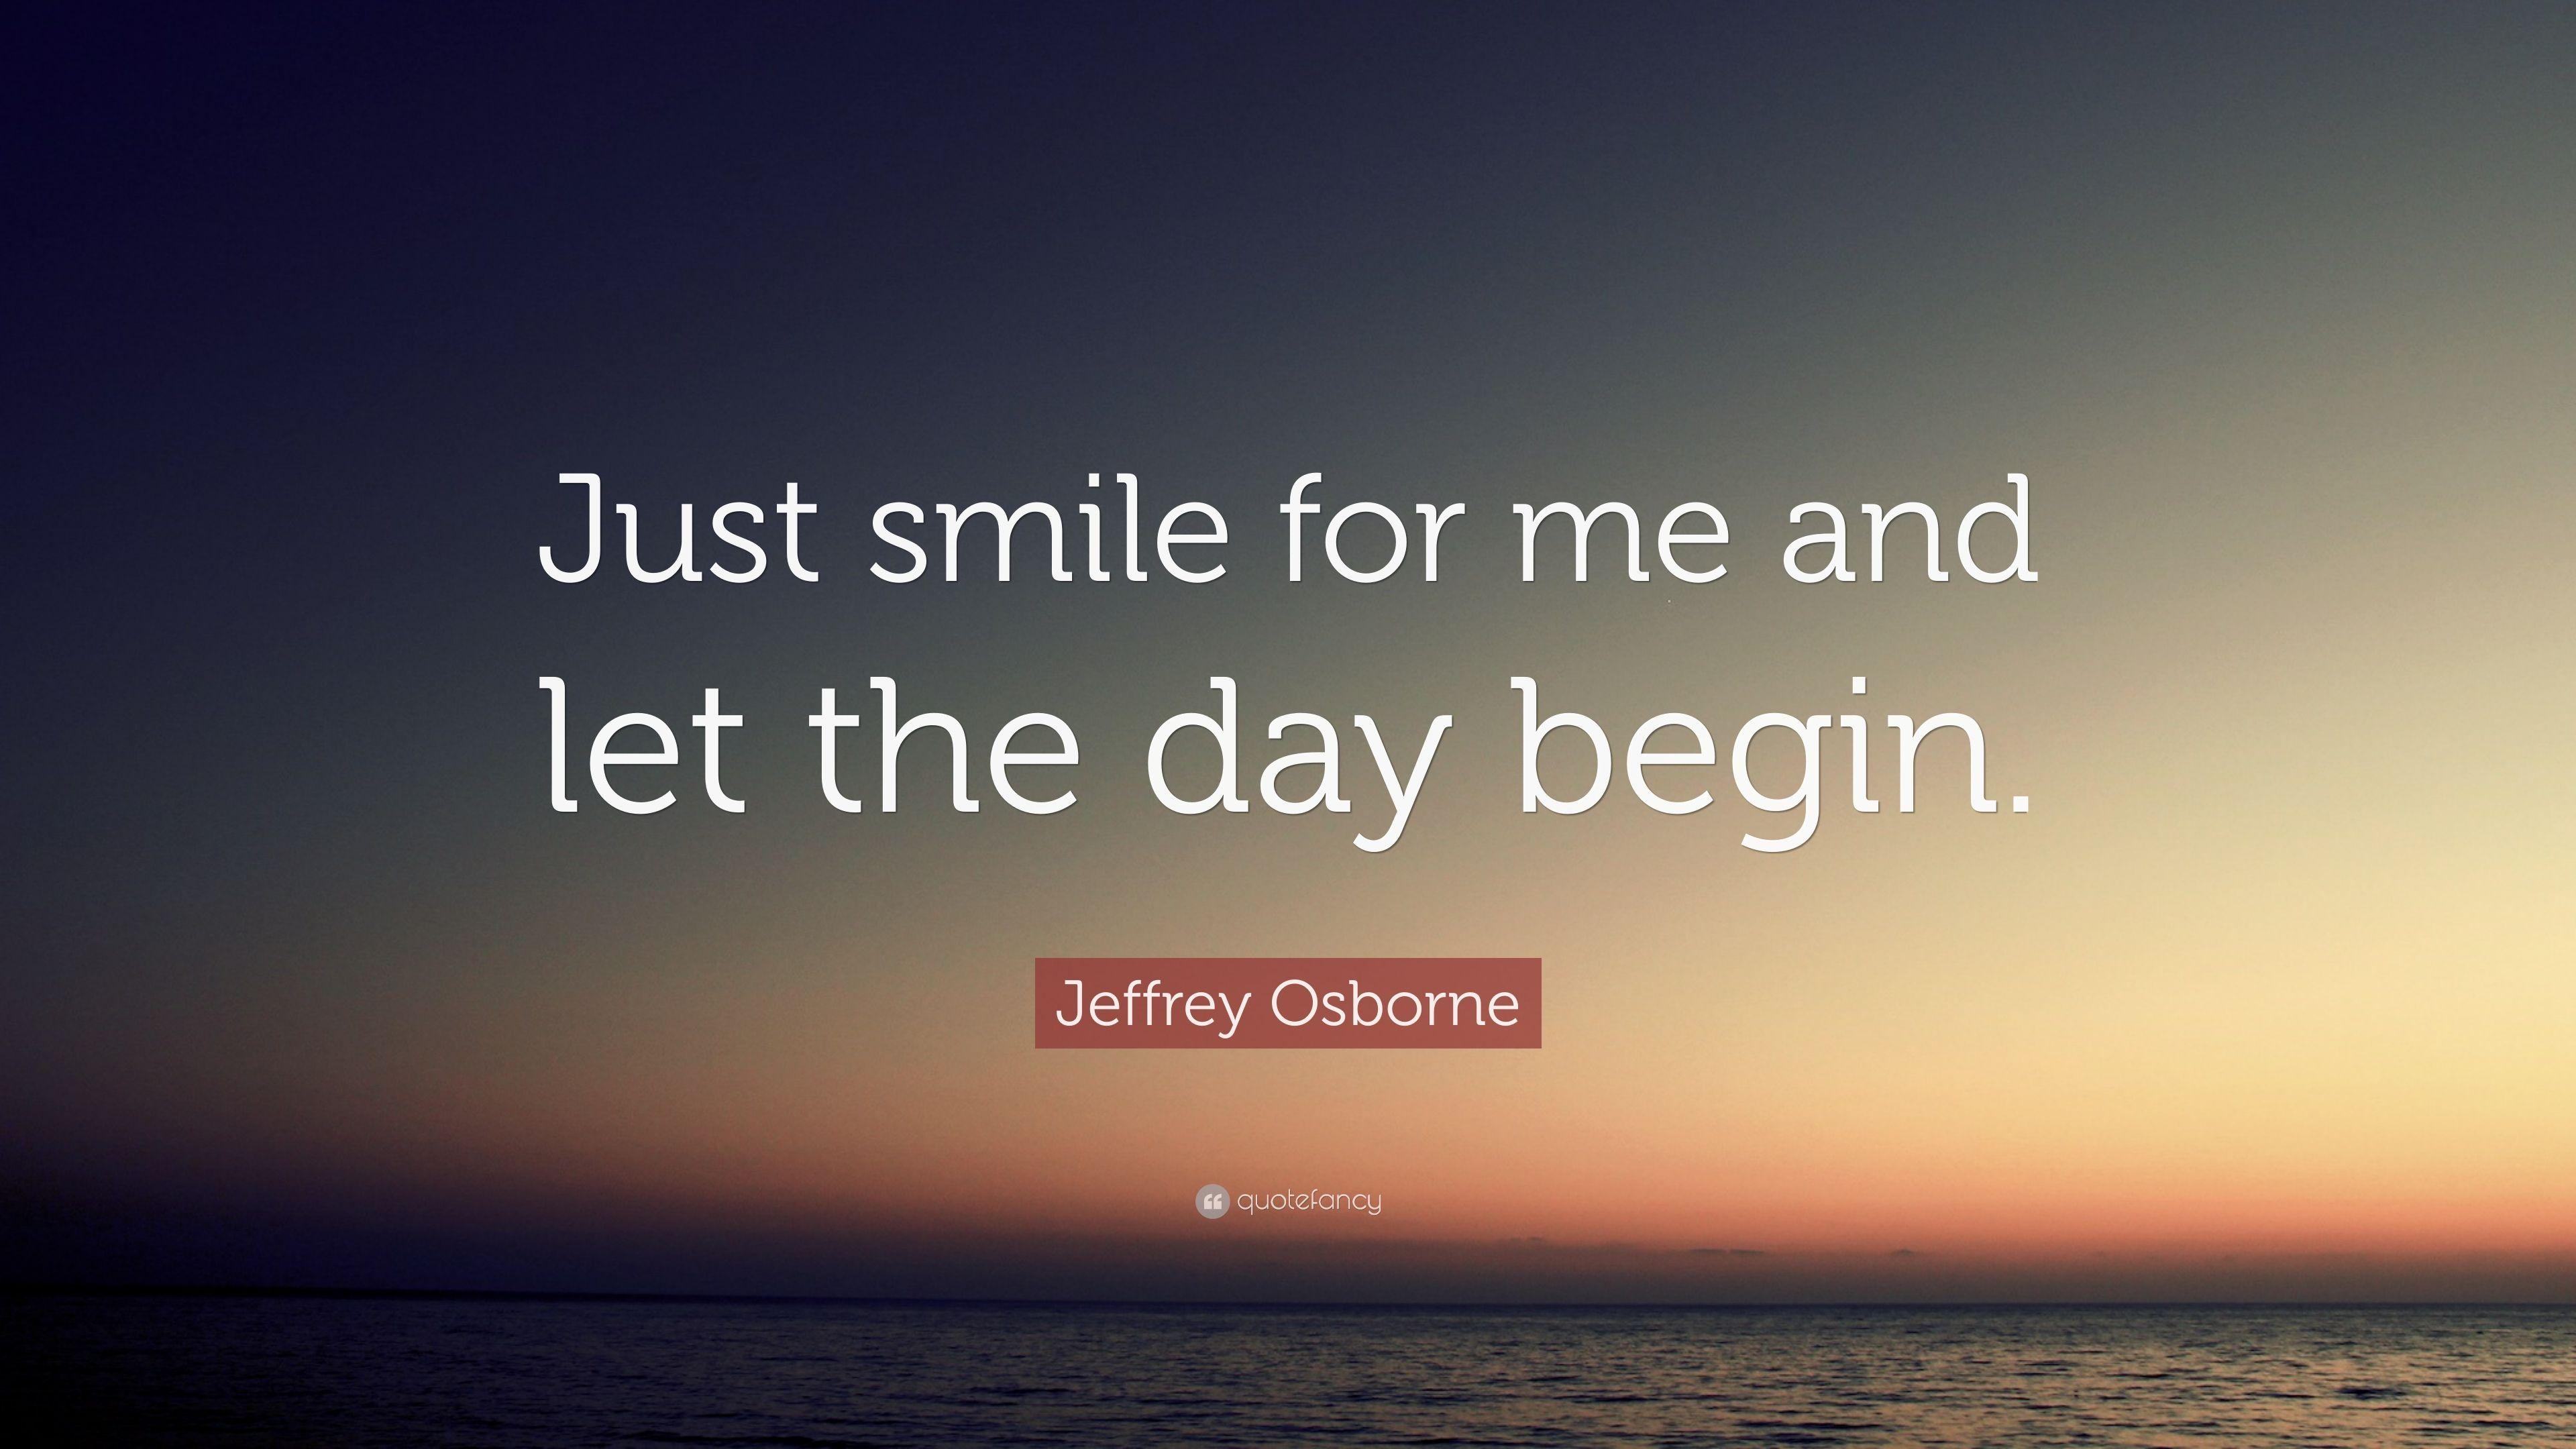 Jeffrey Osborne Quote: “Just smile for me and let the day begin.” 7